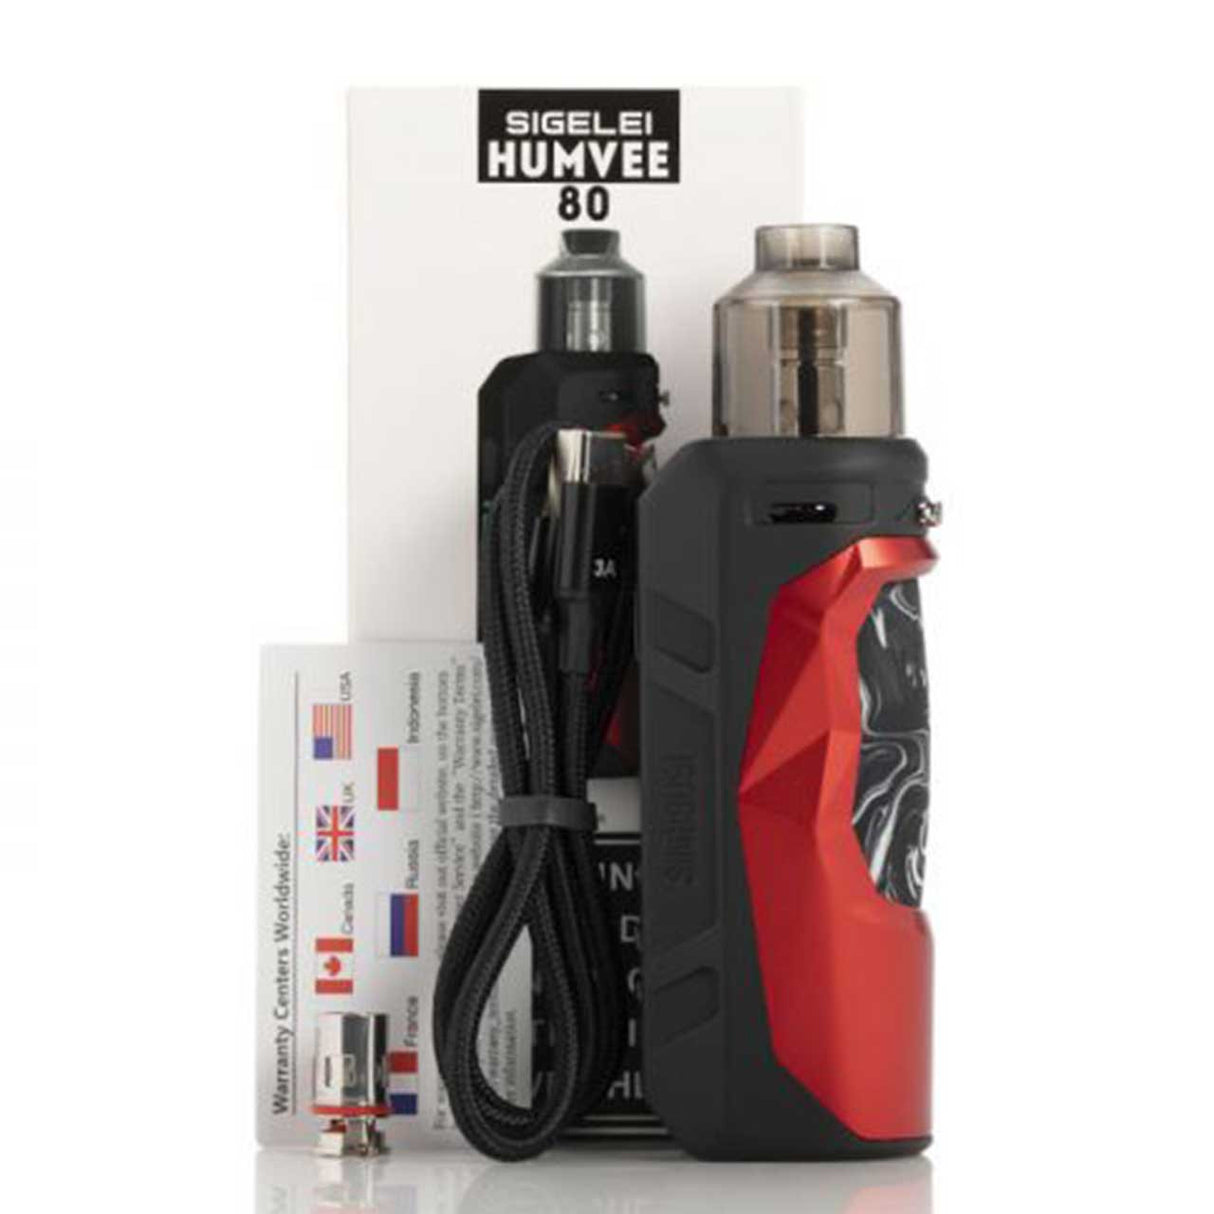 Sigelei HUMVEE 80W Box Mod Starter Kit with zinc-alloy body and rubberized hand grip. Packaging image.